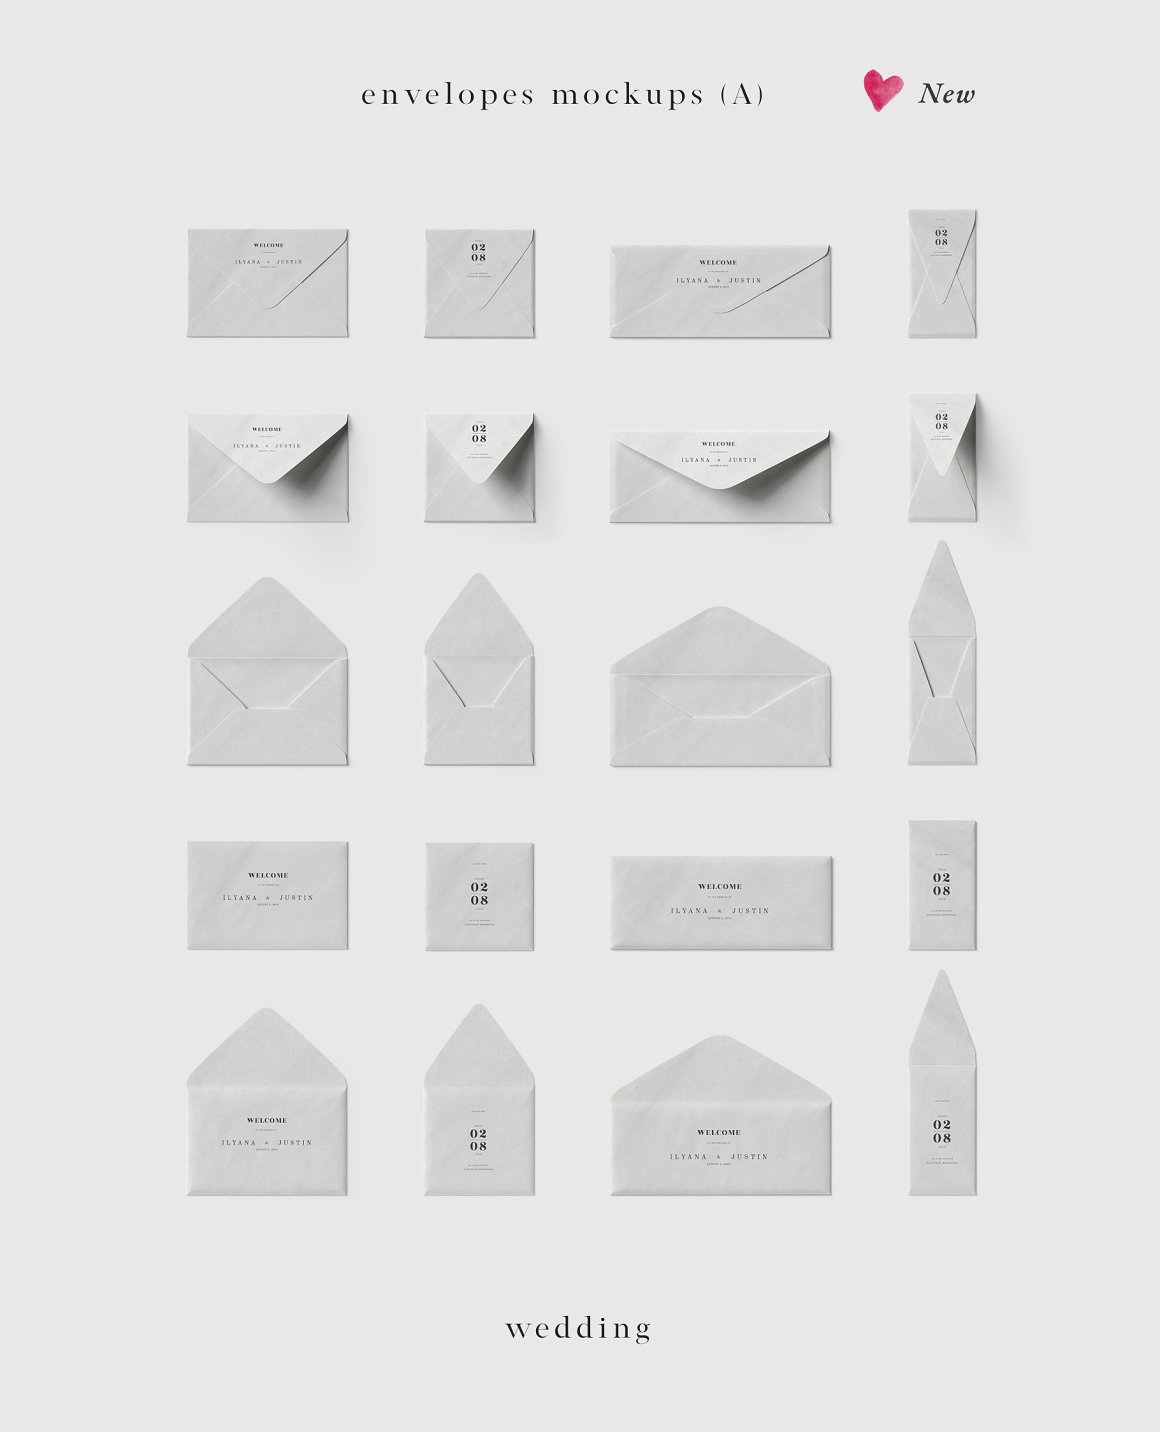 Different Types of Envelopes (A).